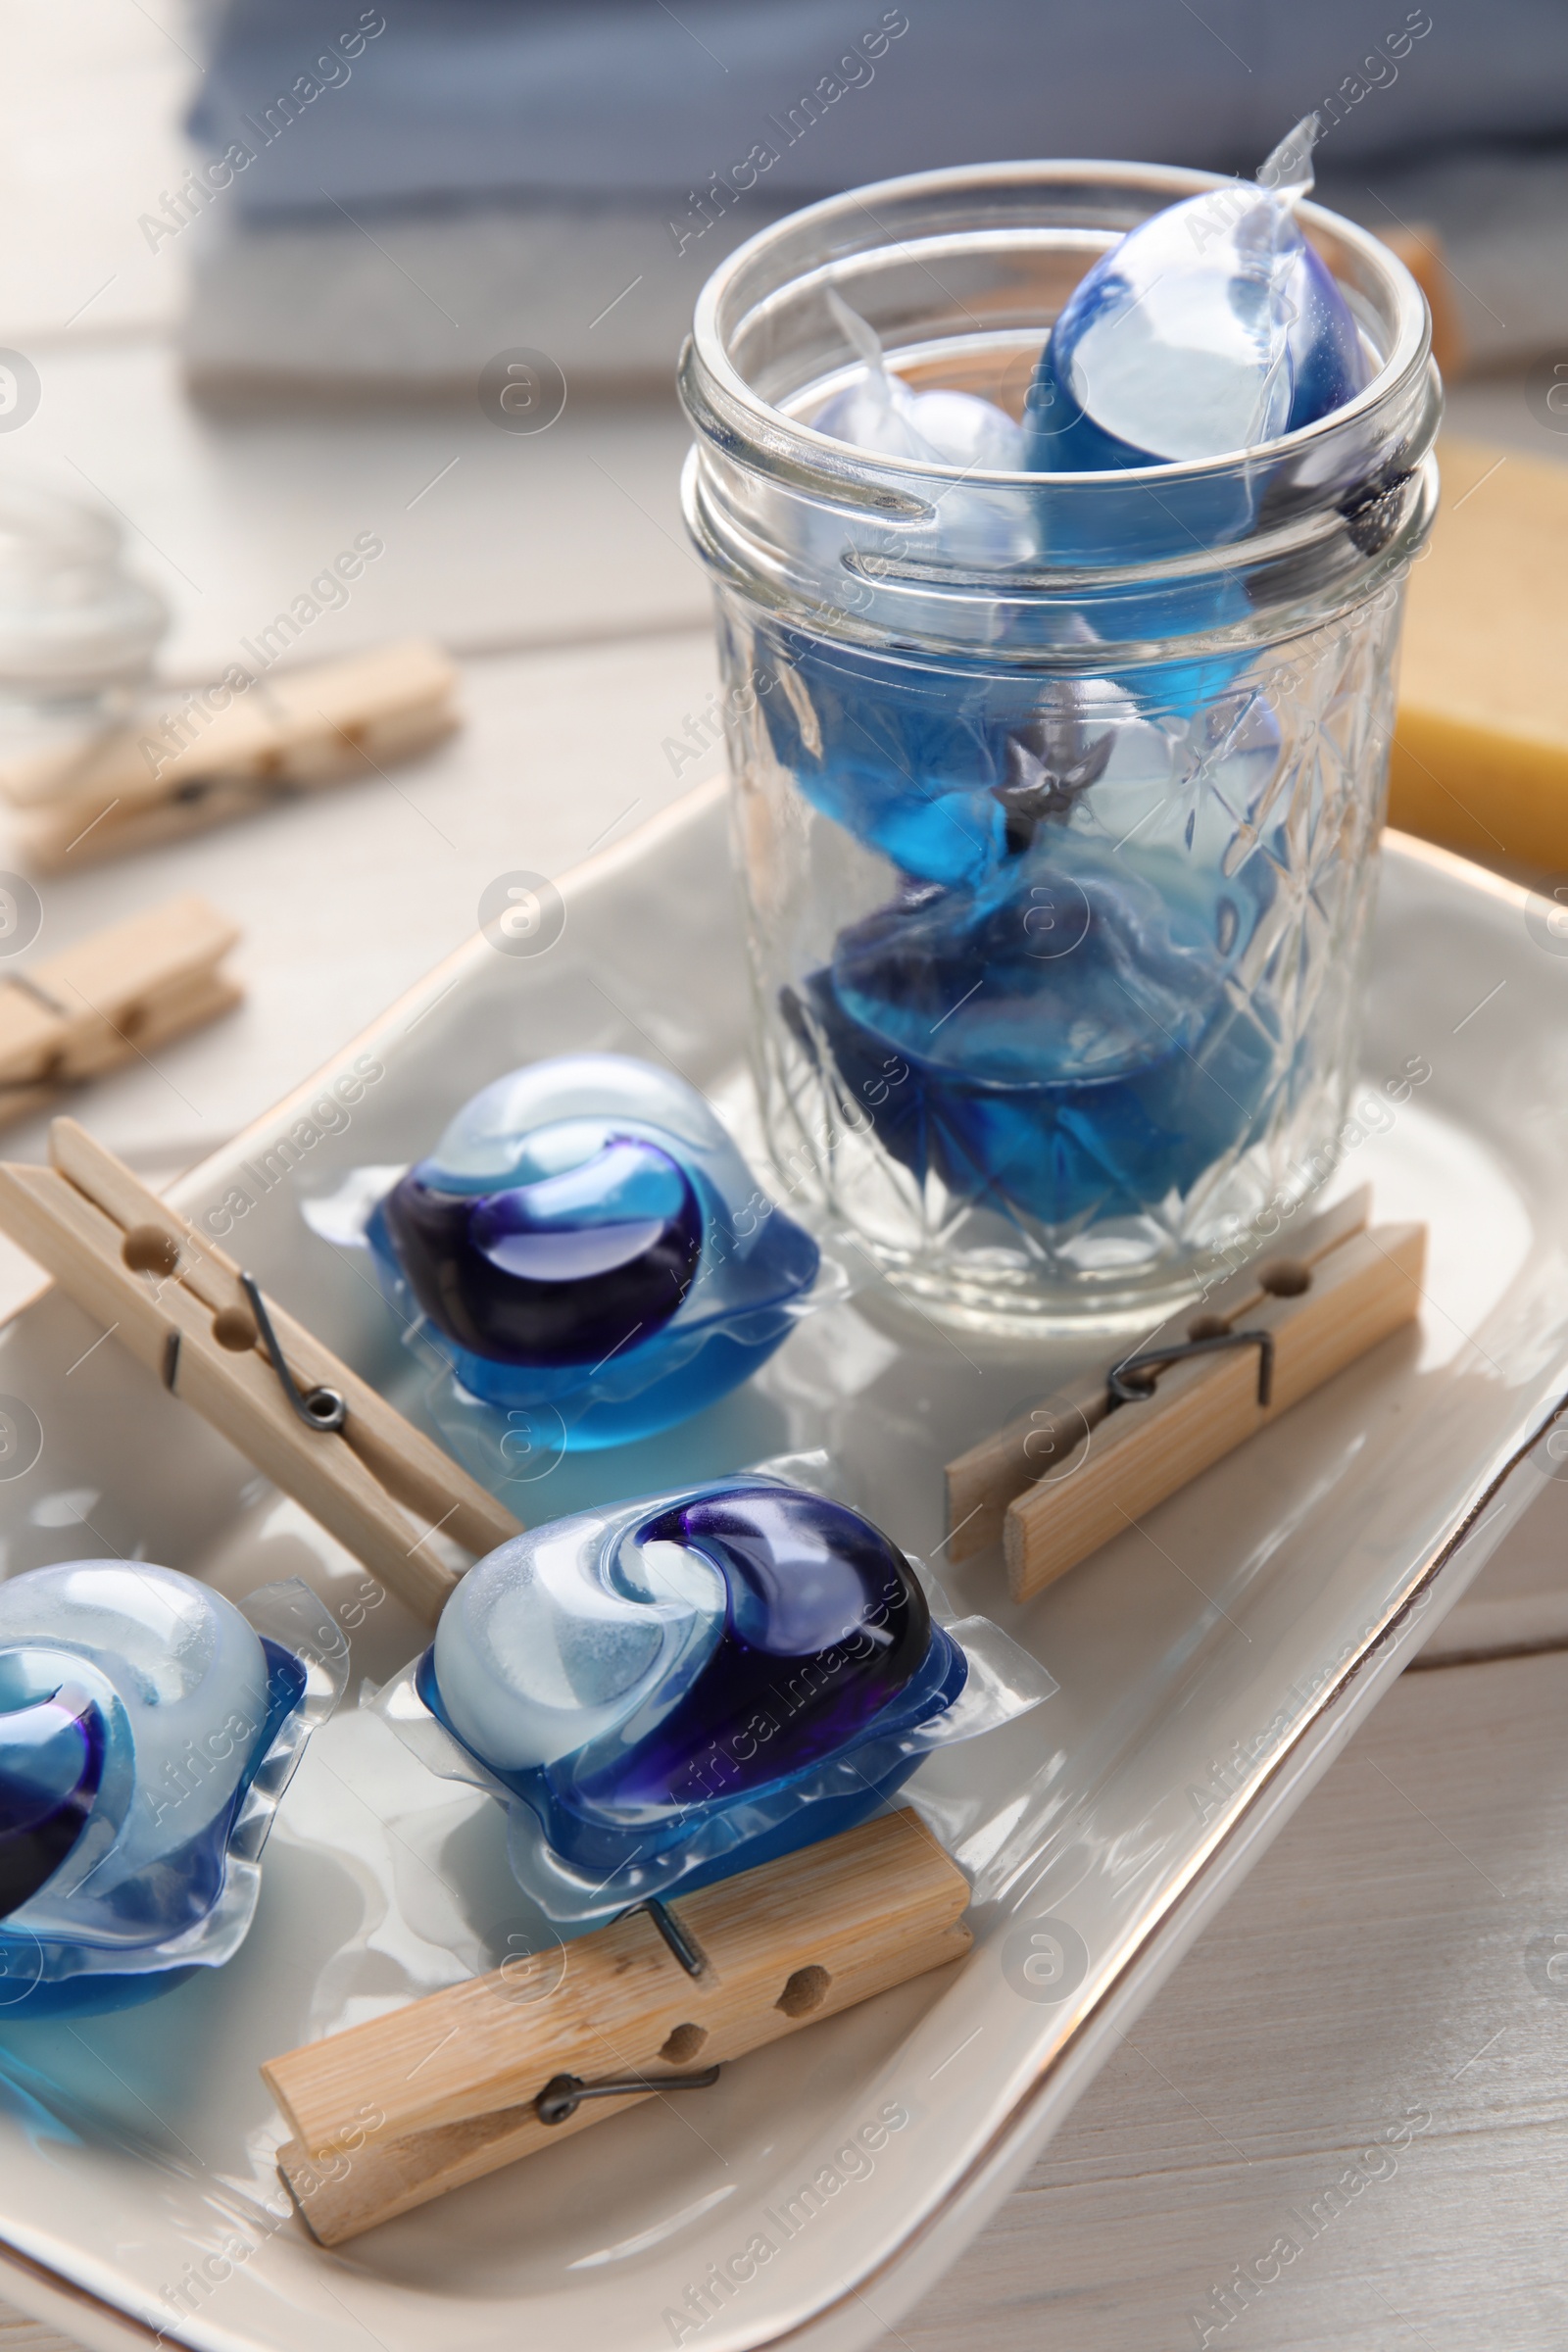 Photo of Many wooden clothespins and laundry detergent pods on white table